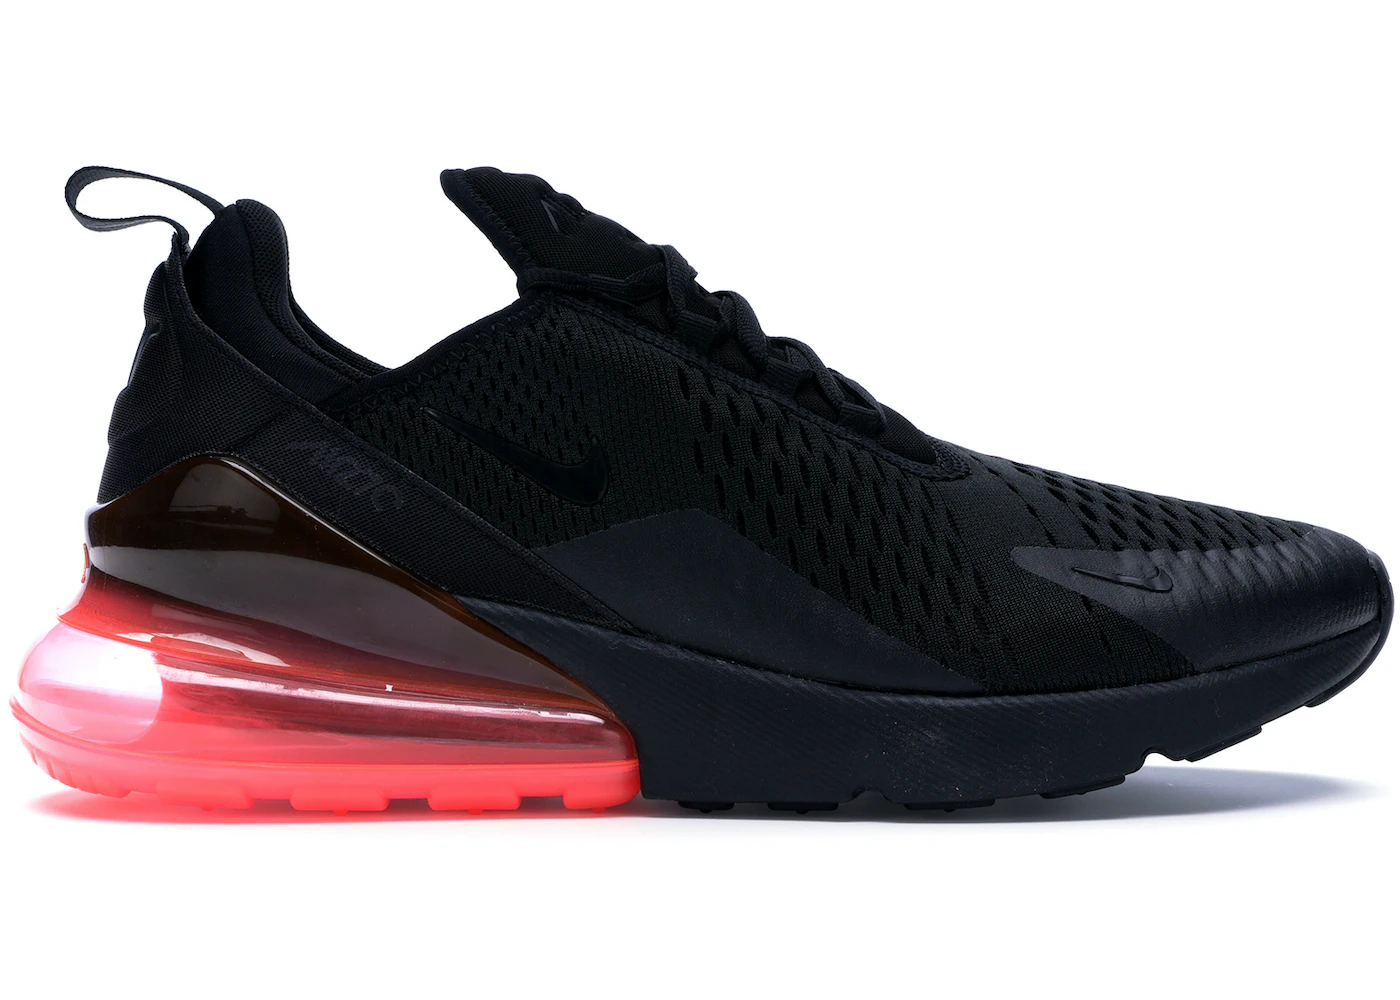 Scully Correspondentie Hij Nike Air Max 270 Black Hot Punch - AH8050-010 - US